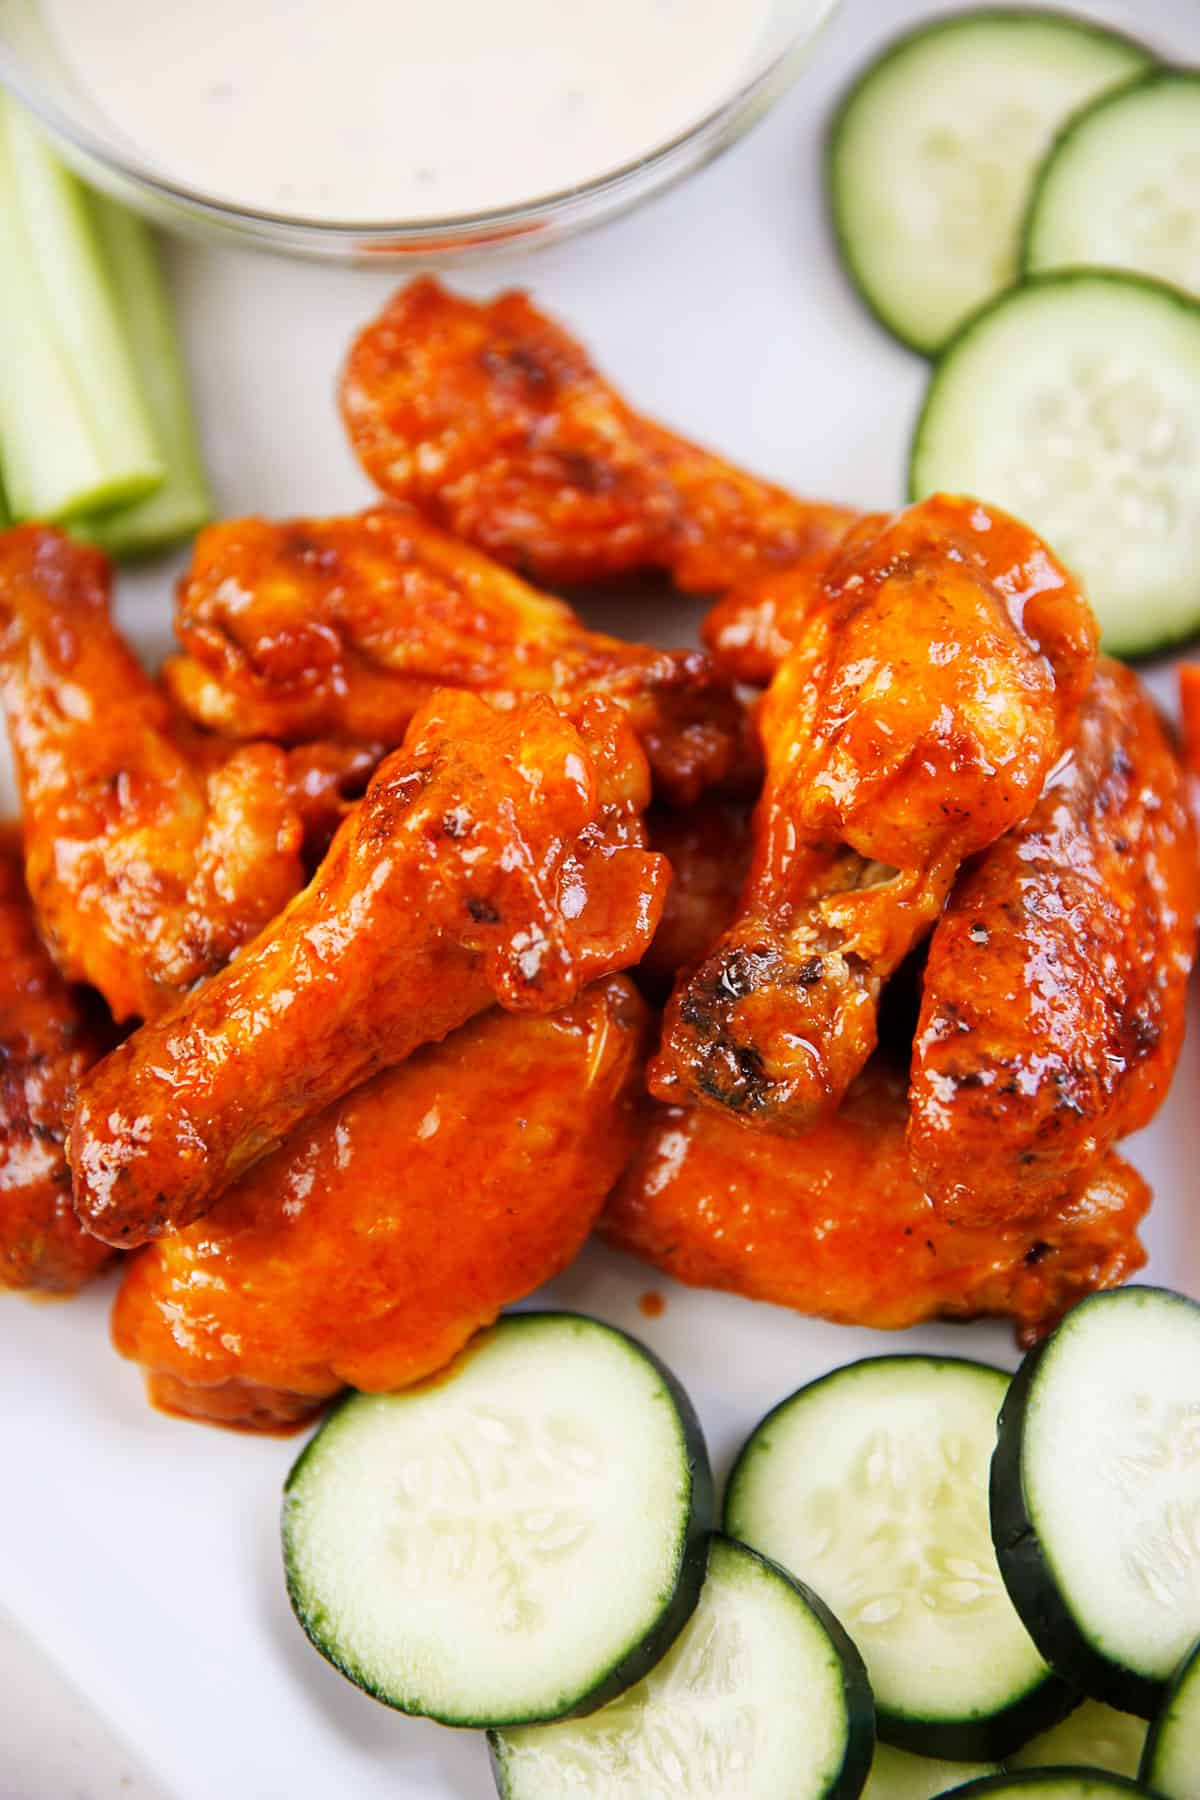 Saucy baked buffalo wings on a platter next to veggies and dip.